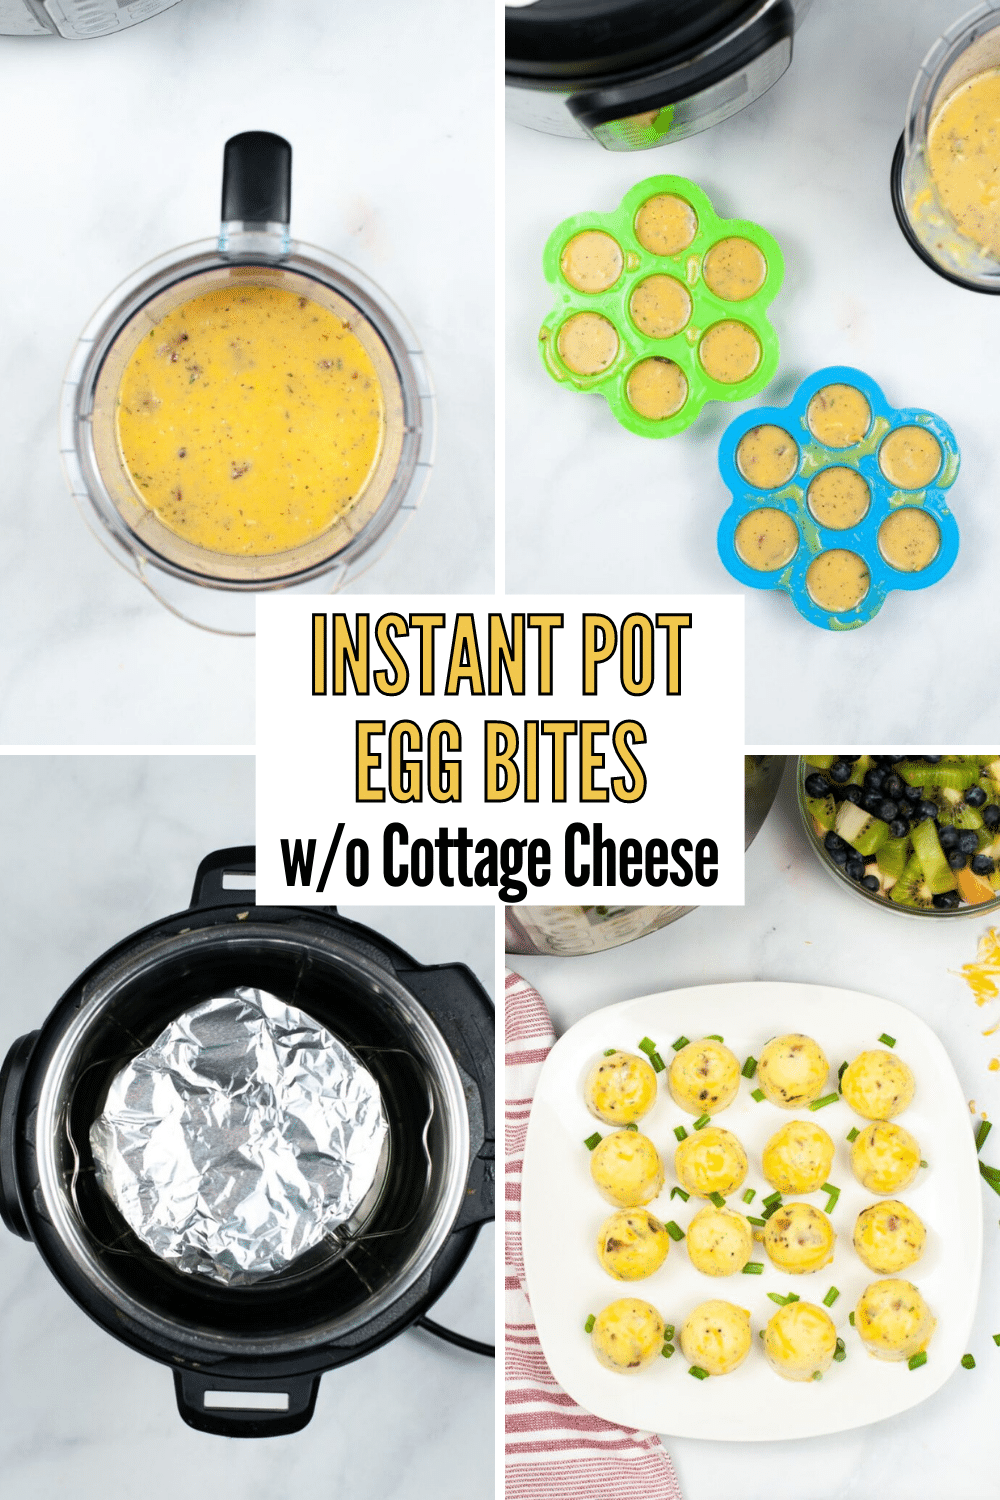 You're going to love these Instant Pot Egg Bites. These high-protein, portable breakfast bites are super easy to make -- just 3 ingredients! #instantpot #pressurecooker #eggbites #breakfast via @wondermomwannab